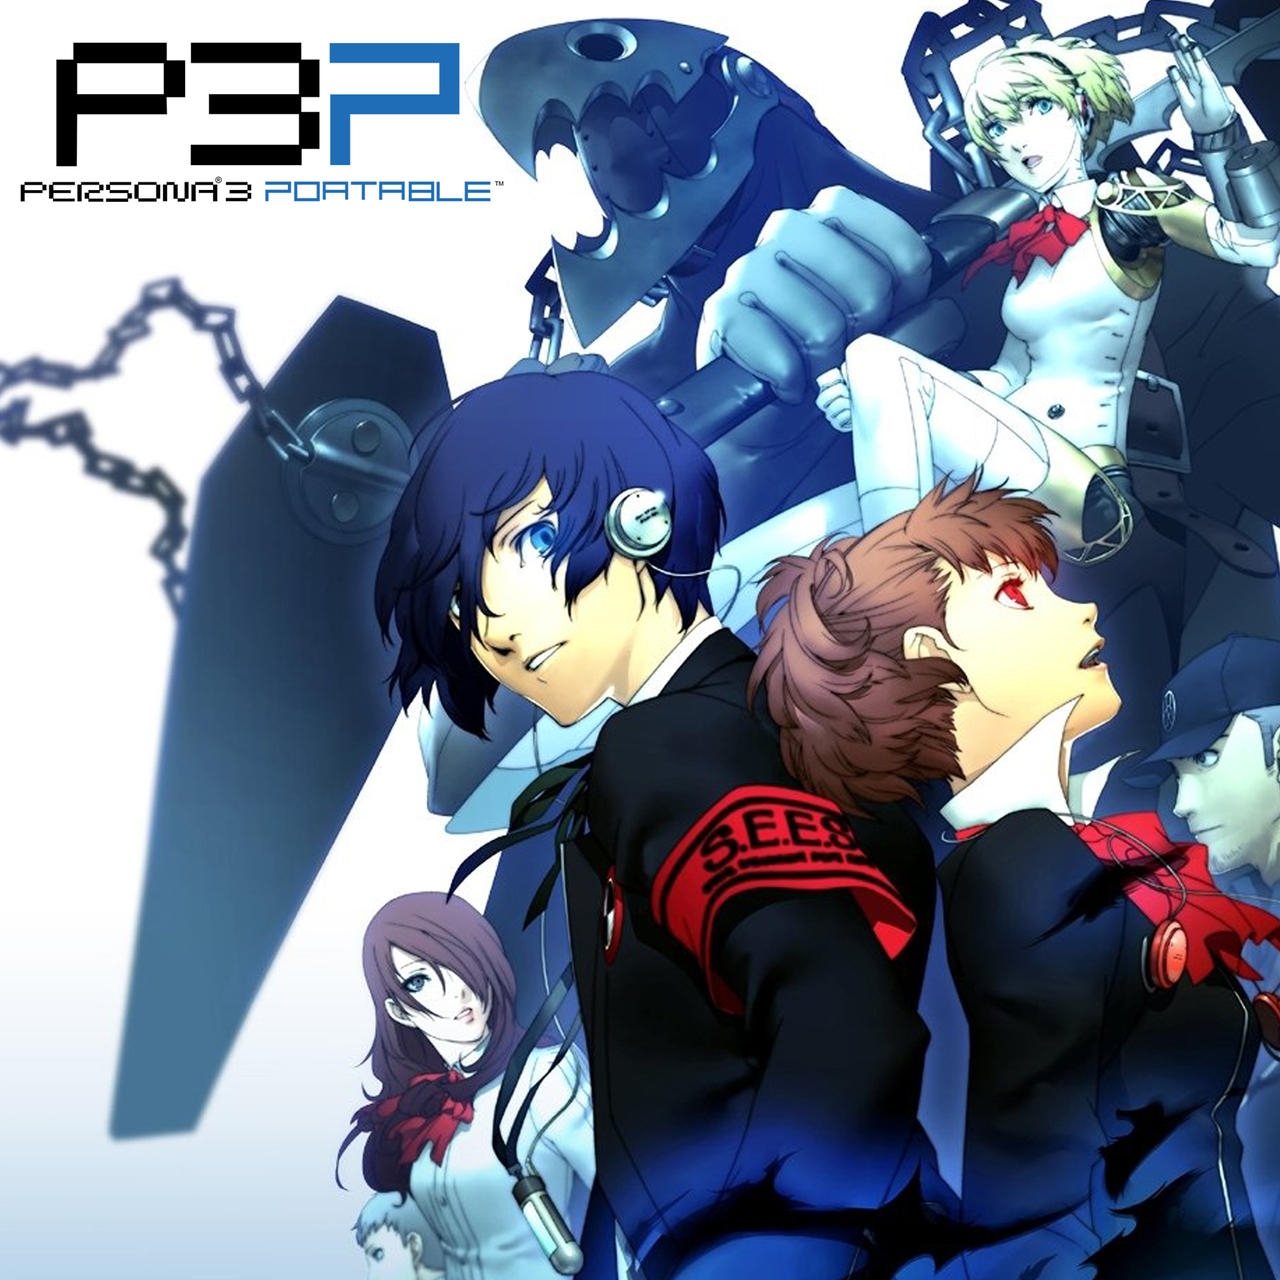 TGDB - Browse - Game - Persona 3 Portable